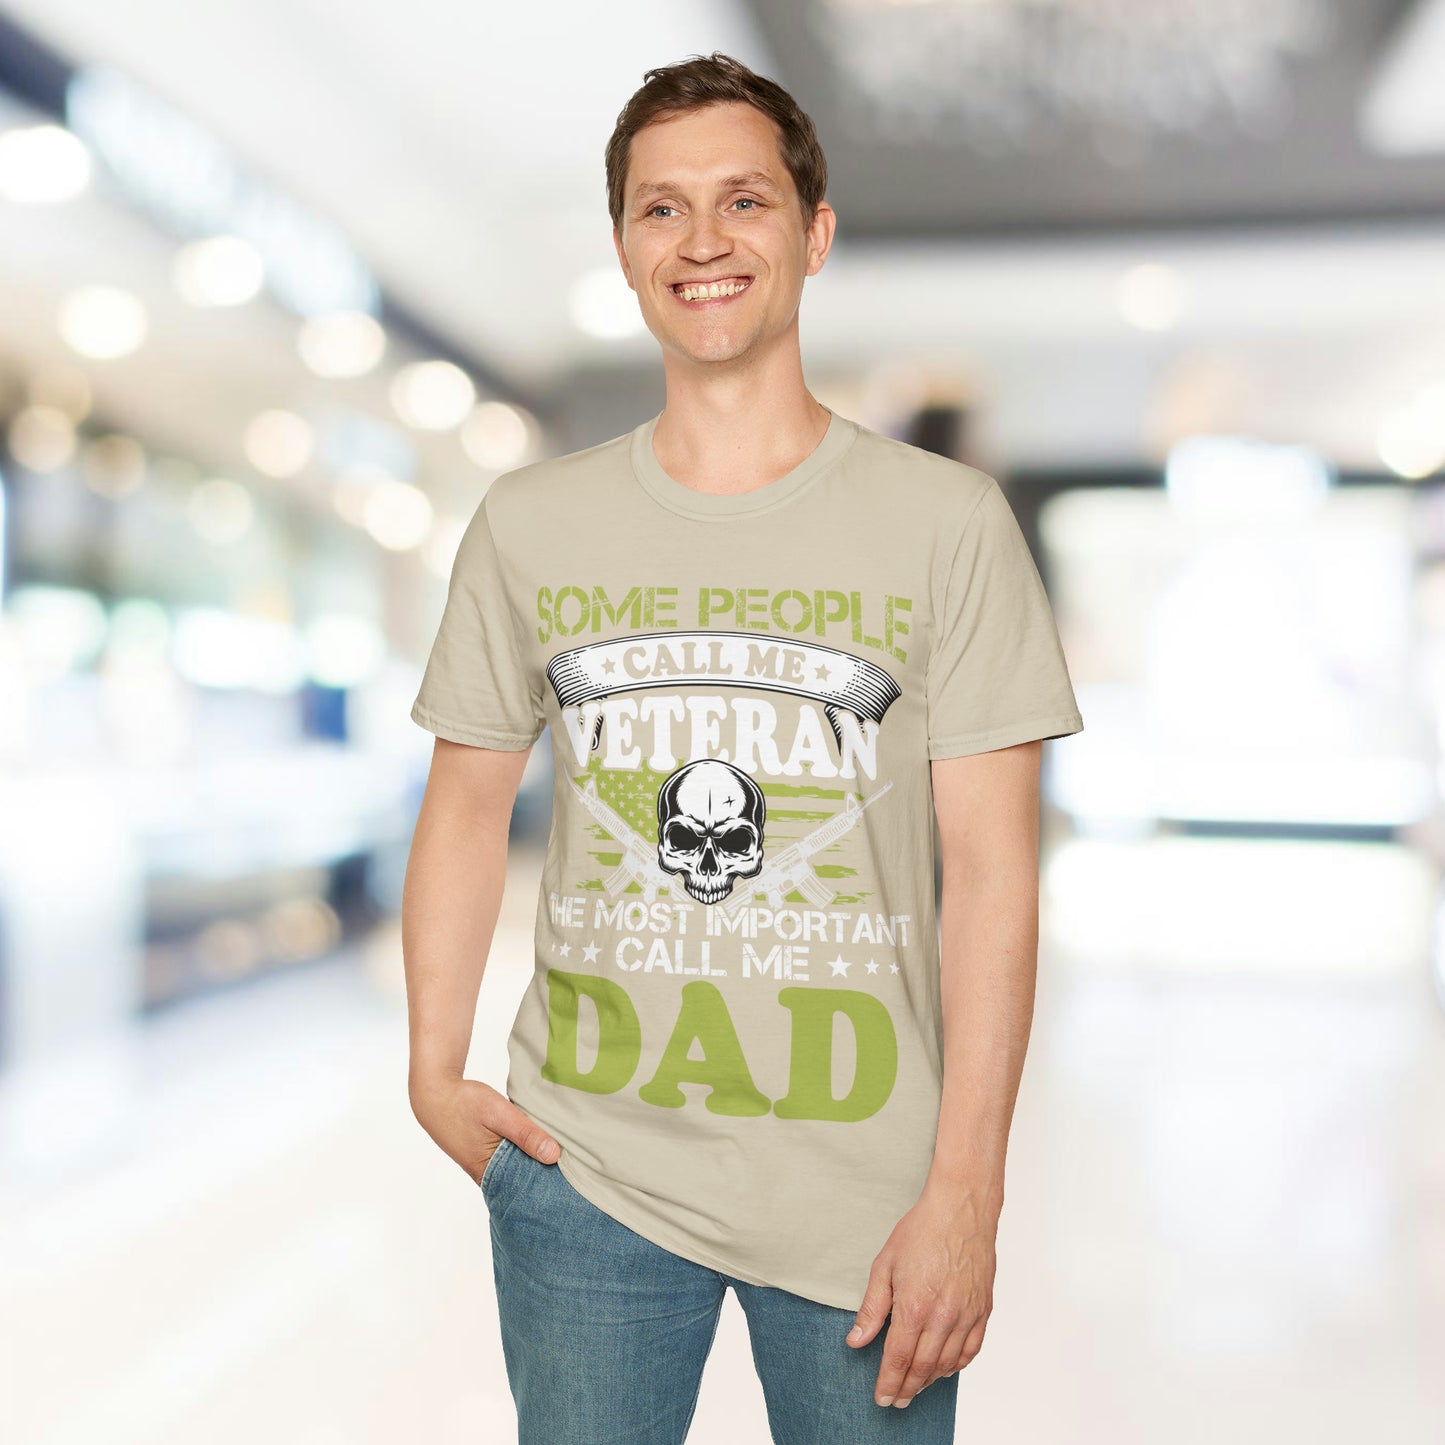 Some Call Me Veteran - Dad - Unisex Softstyle T-Shirt